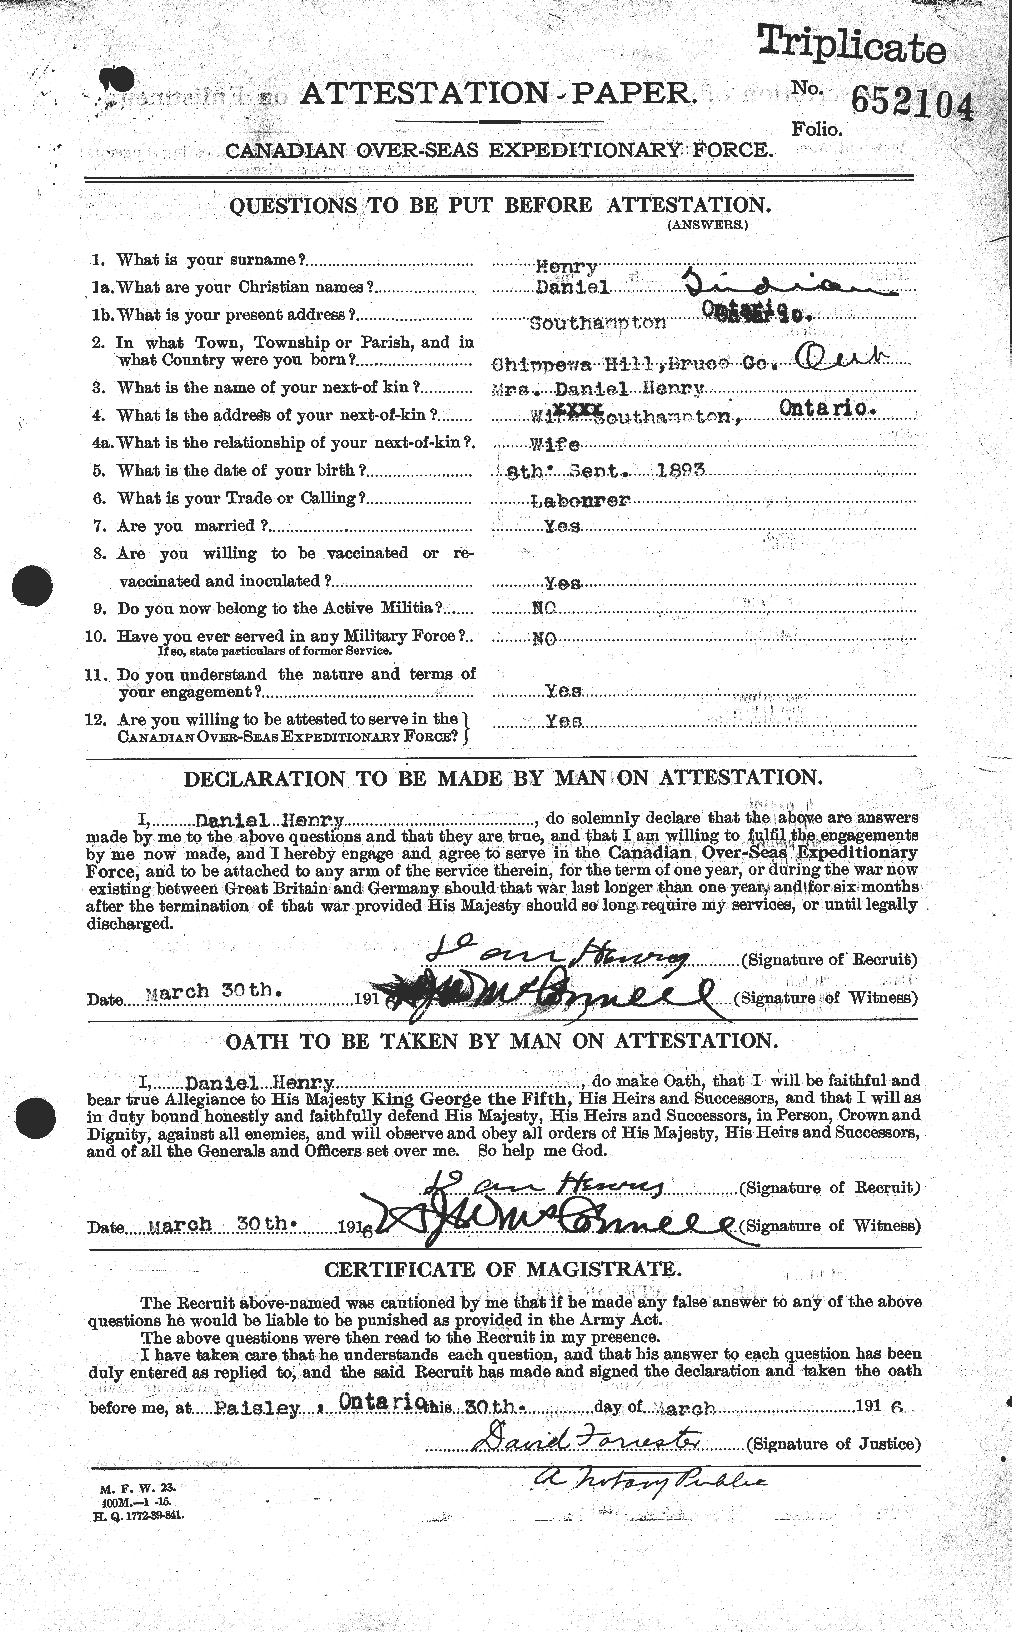 Personnel Records of the First World War - CEF 392819a